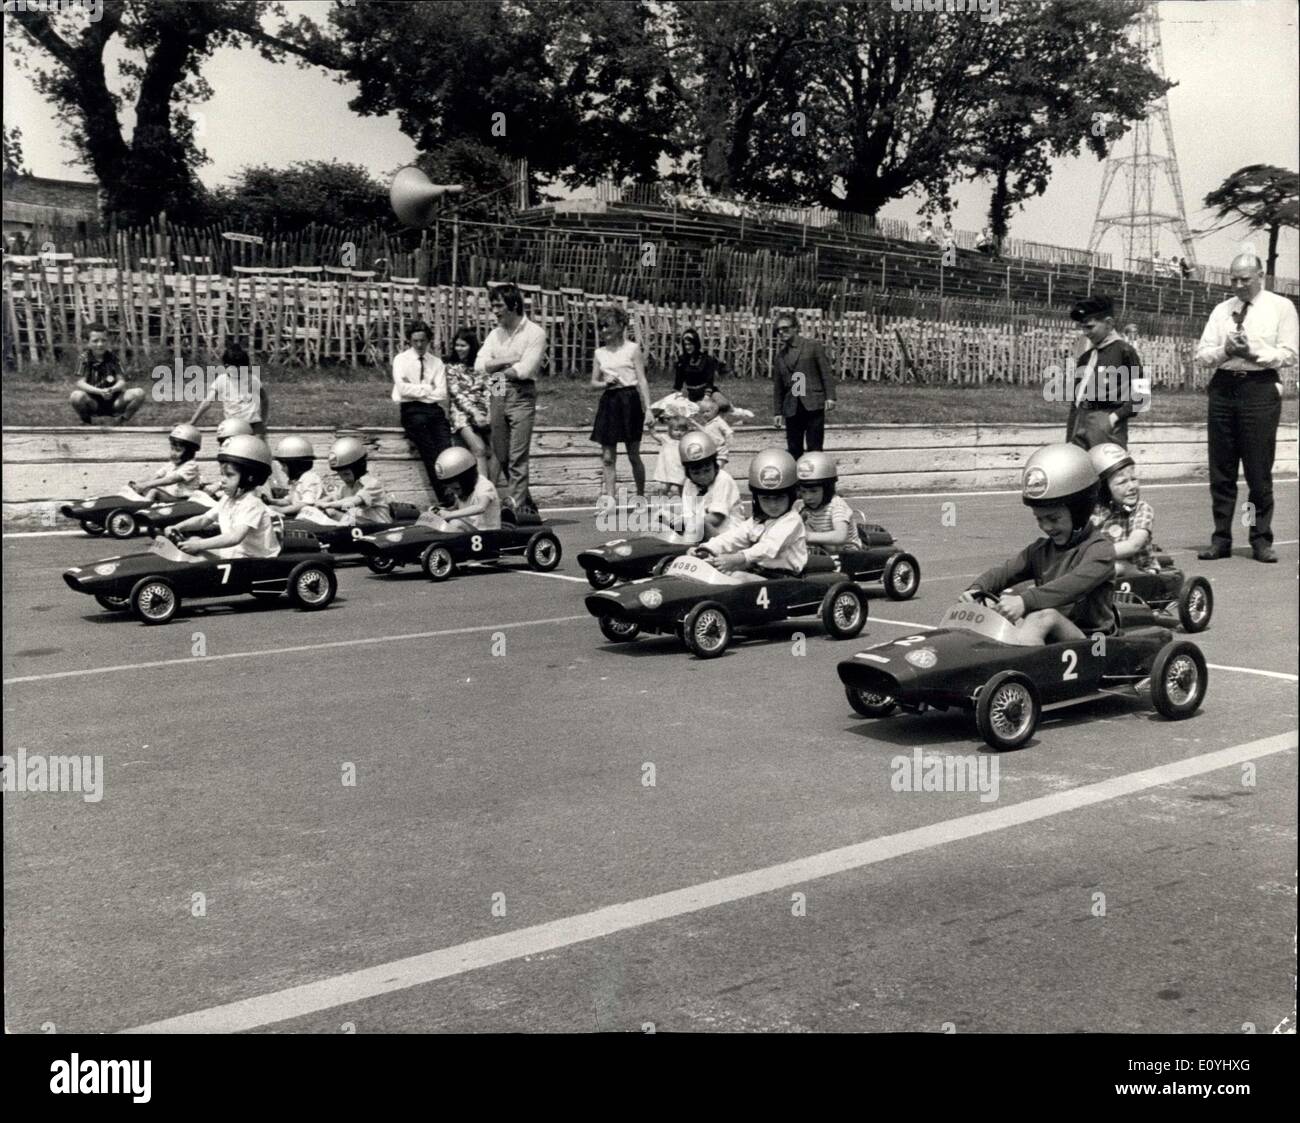 Jun. 07, 1970 - The Rac' Junior Grand Prix'' Race at Crystal Palace.: Britains's Young aspiring dirvers took part today in the Rac ''Junior Grand Prix''. The competitors were at the controlks of ''pedal-powered'' mini-racing cars as they made a 75-yards dash down a section of the motor racing circuit at Crystal Palace normally used by the more experienced racing drivers Stock Photo